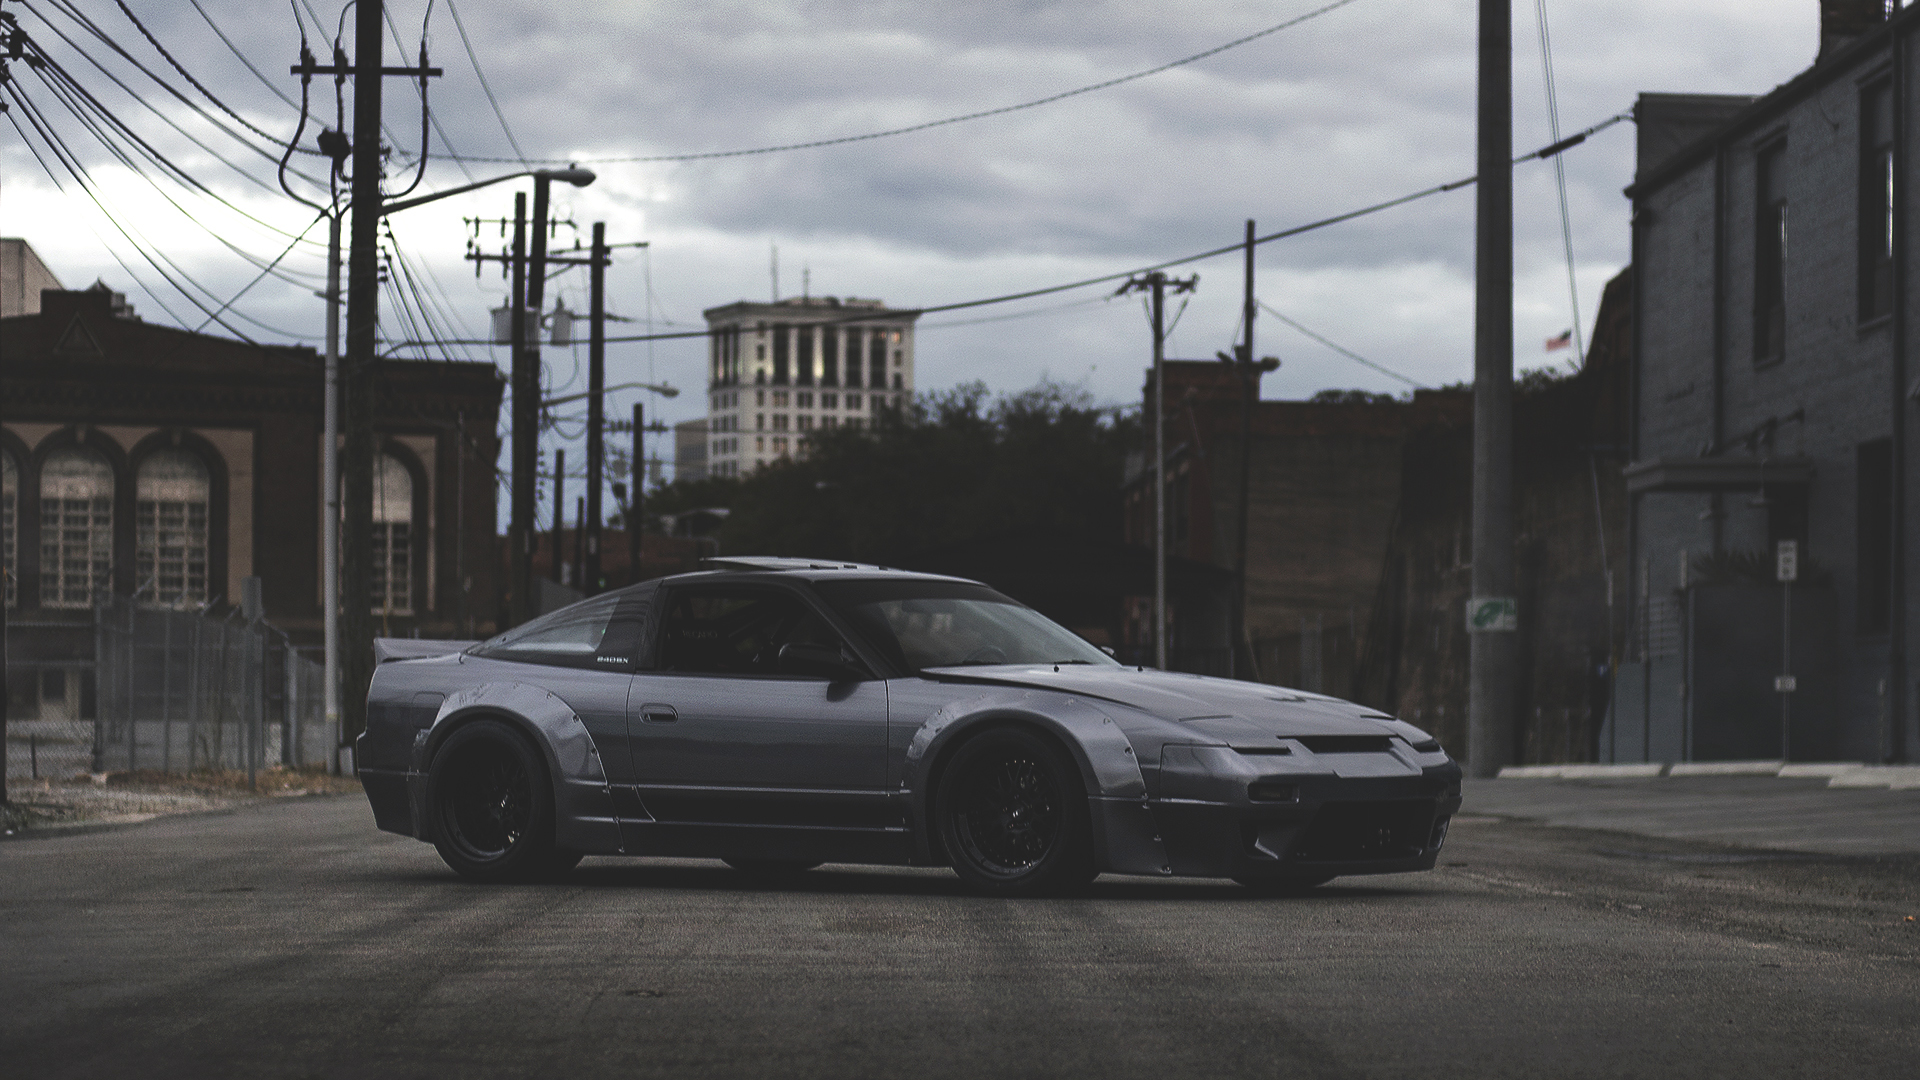 5 Nissan 240SX HD Wallpapers | Backgrounds - Wallpaper Abyss